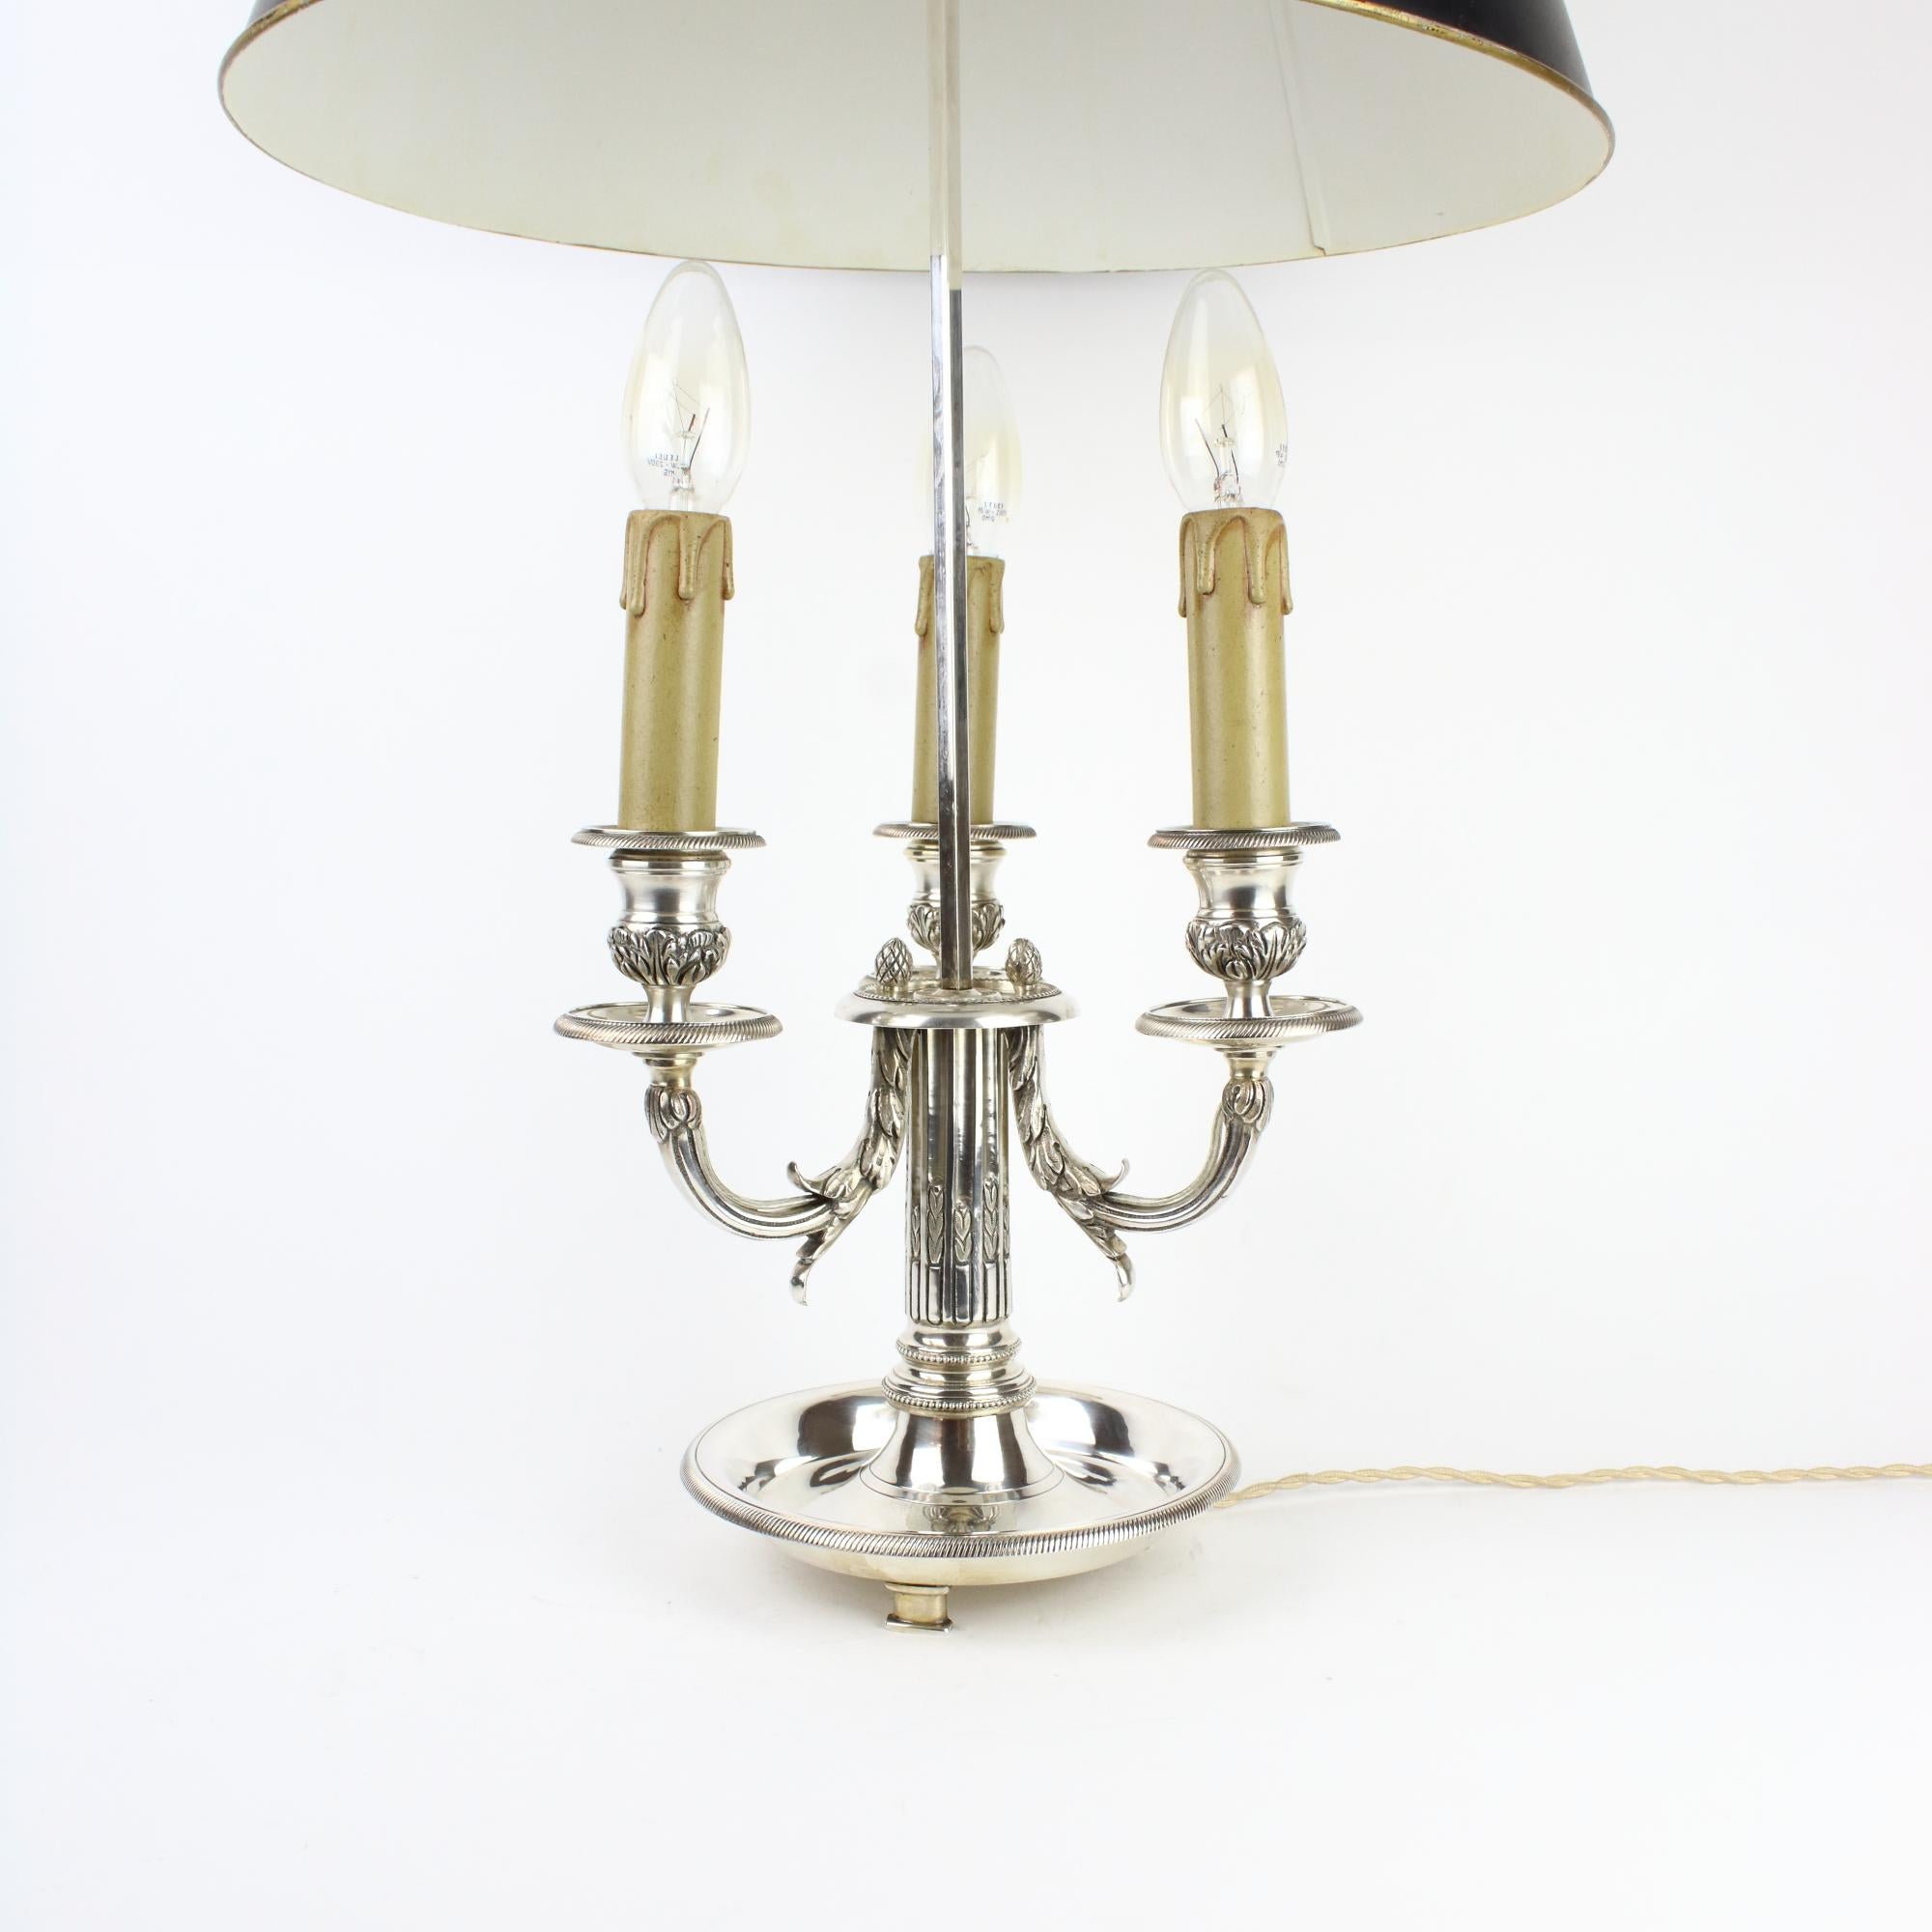 19th Century French silver plate Louis XVI three-light bouillotte table lamp.

A 19th century Louis XVI style silver plate bouillotte lamp fitted with a black toleware lampshade, with a circular fluted stem supporting three scrolled foliate candle